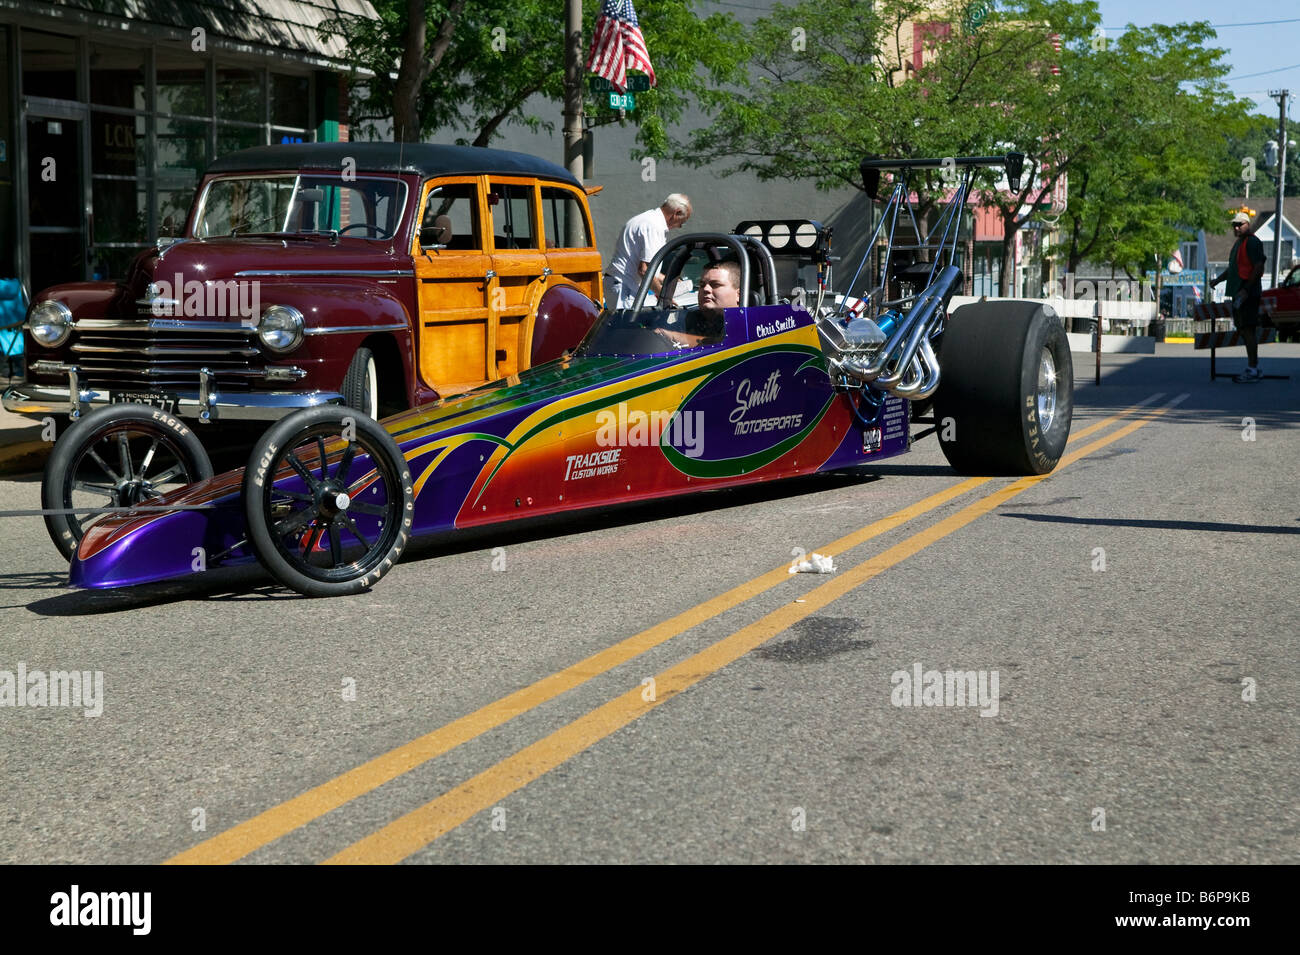 Parallel parking a top fuel dragster on Main street. Stock Photo